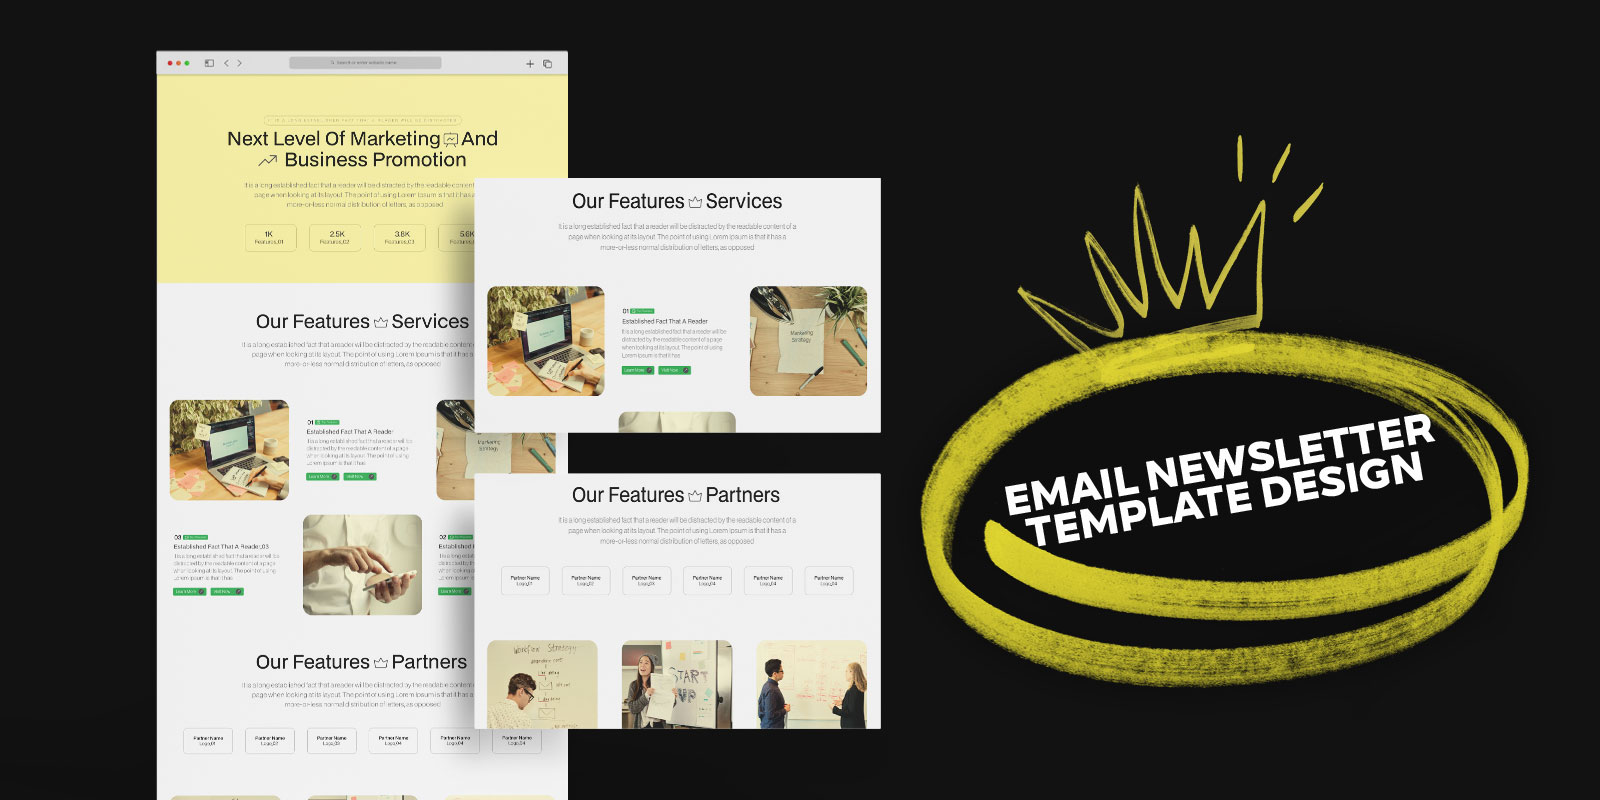 Email Template Layout or Landing Page Design Layout for Business Service Promotion